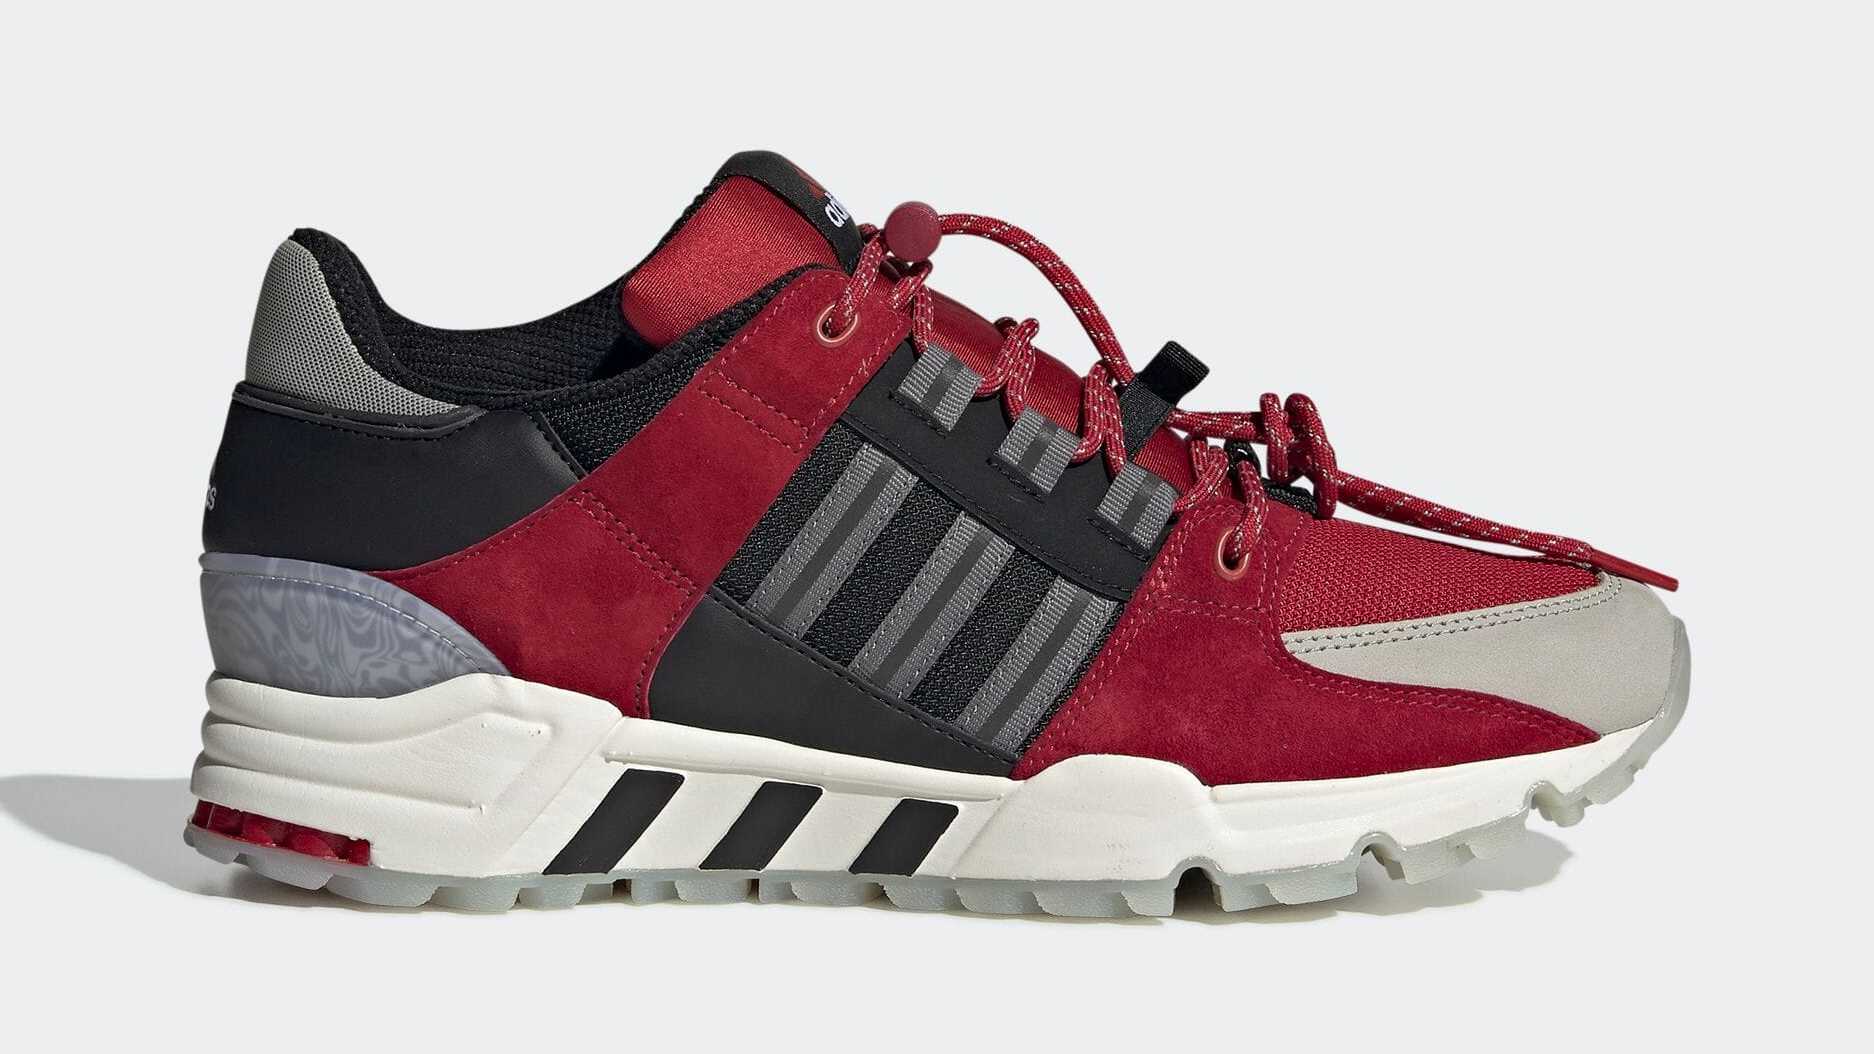 This Adidas EQT 93 Is Inspired By a Swiss Army Knife | Complex